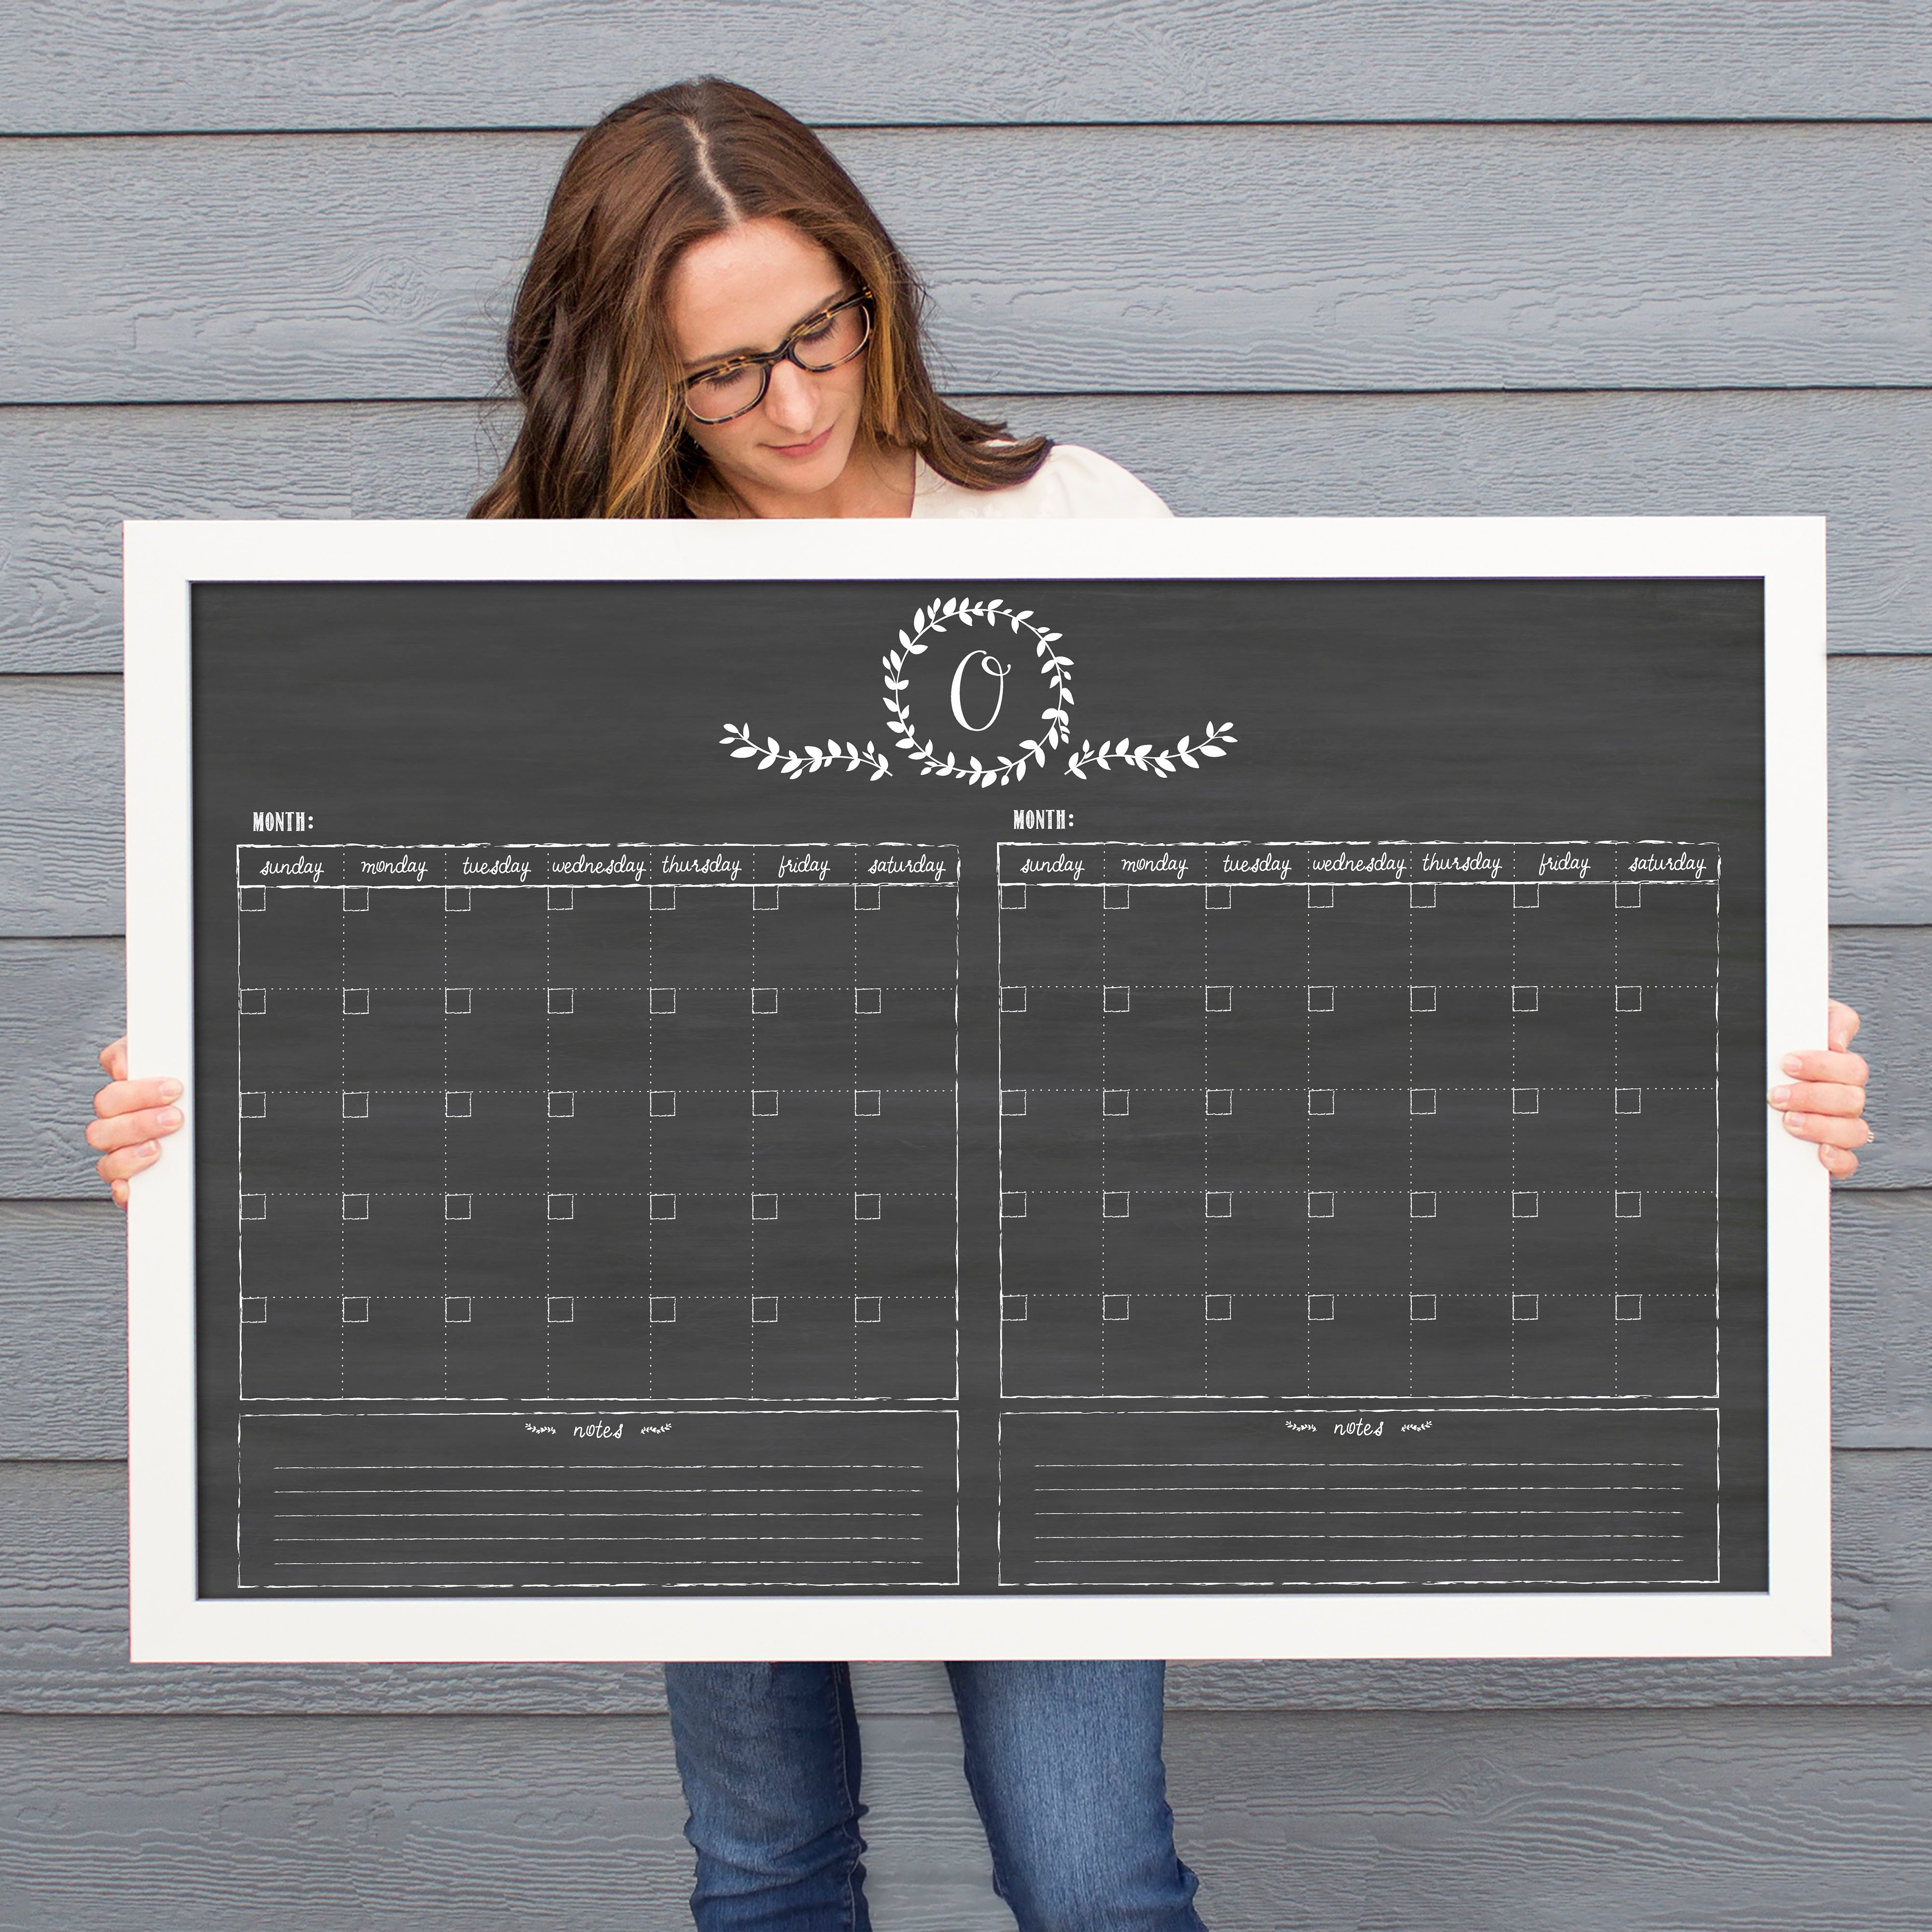 A framed chalkboard dry-erase calendar with a two month design format hanging on the wall